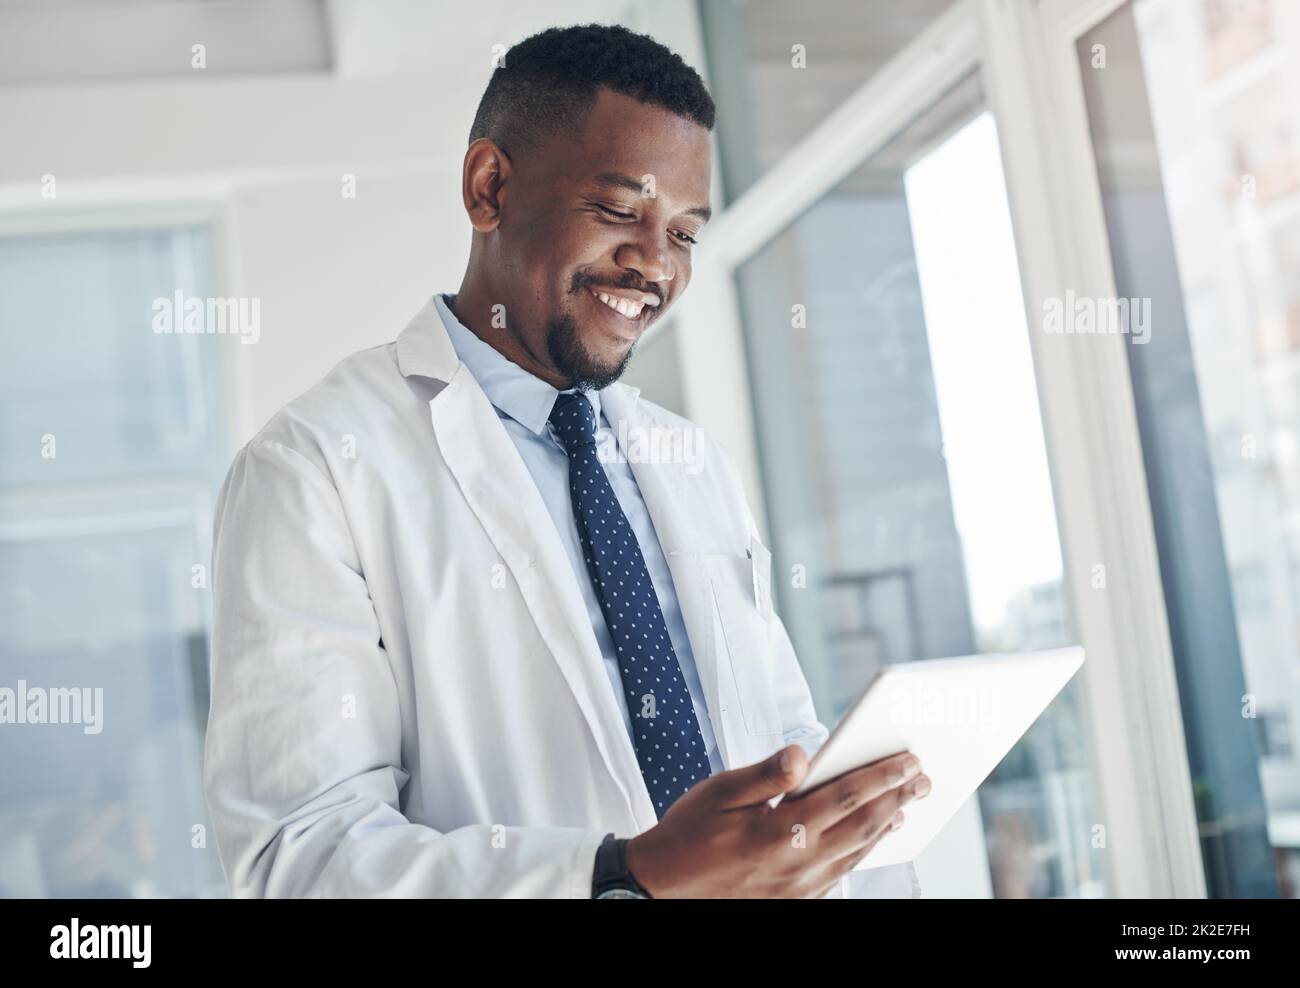 I found the information I needed. Shot of a young doctor using a digital tablet in an office. Stock Photo